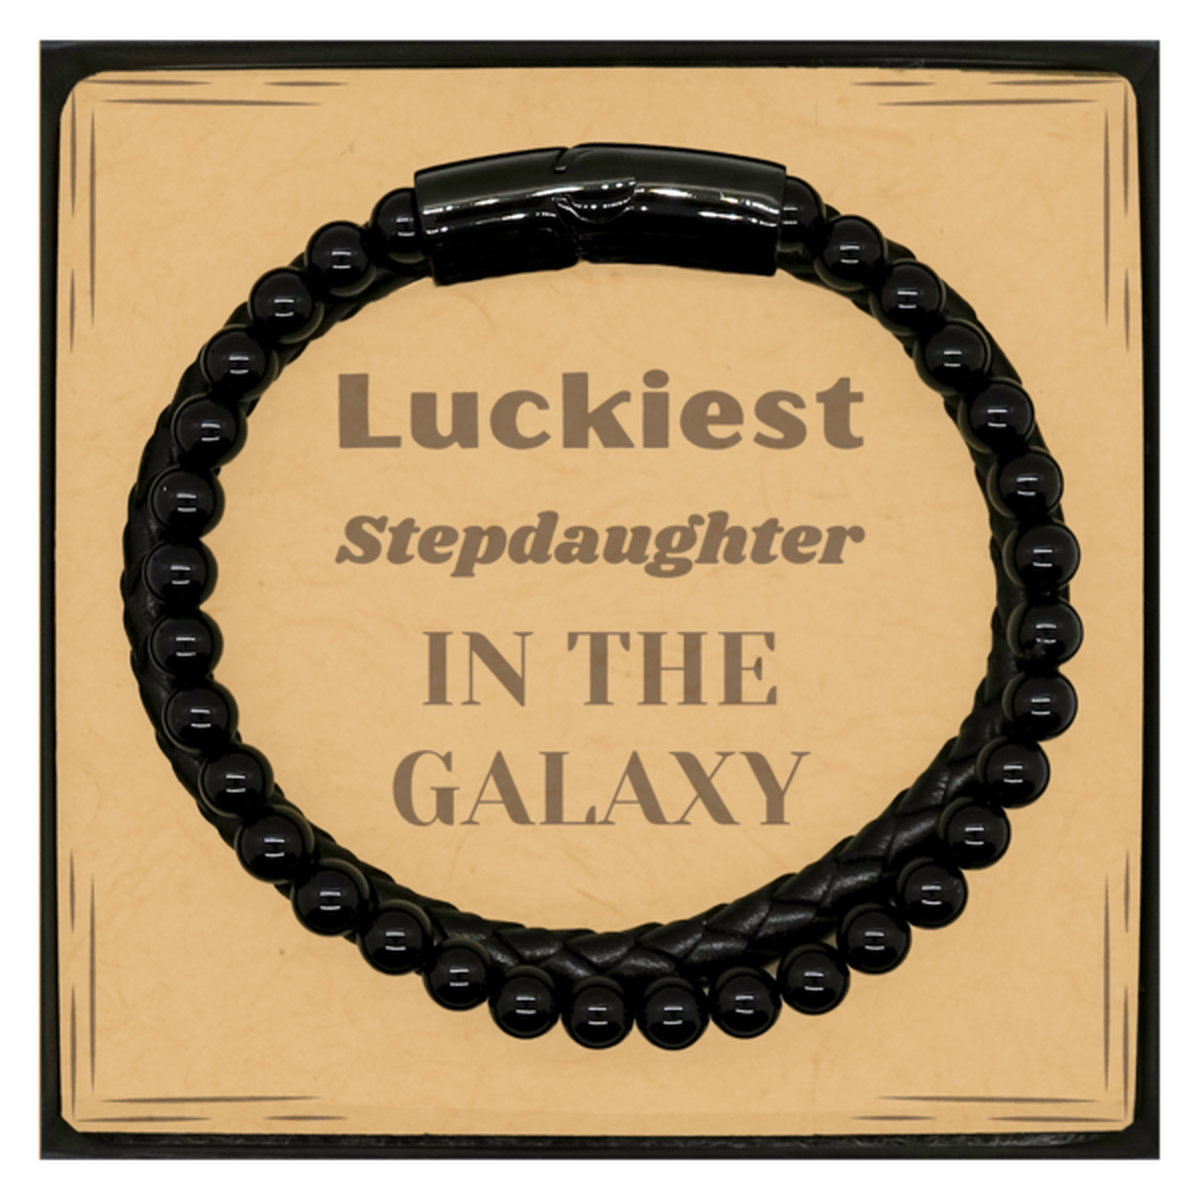 Luckiest Stepdaughter in the Galaxy, To My Stepdaughter Message Card Gifts, Christmas Stepdaughter Stone Leather Bracelets Gifts, X-mas Birthday Unique Gifts For Stepdaughter Men Women